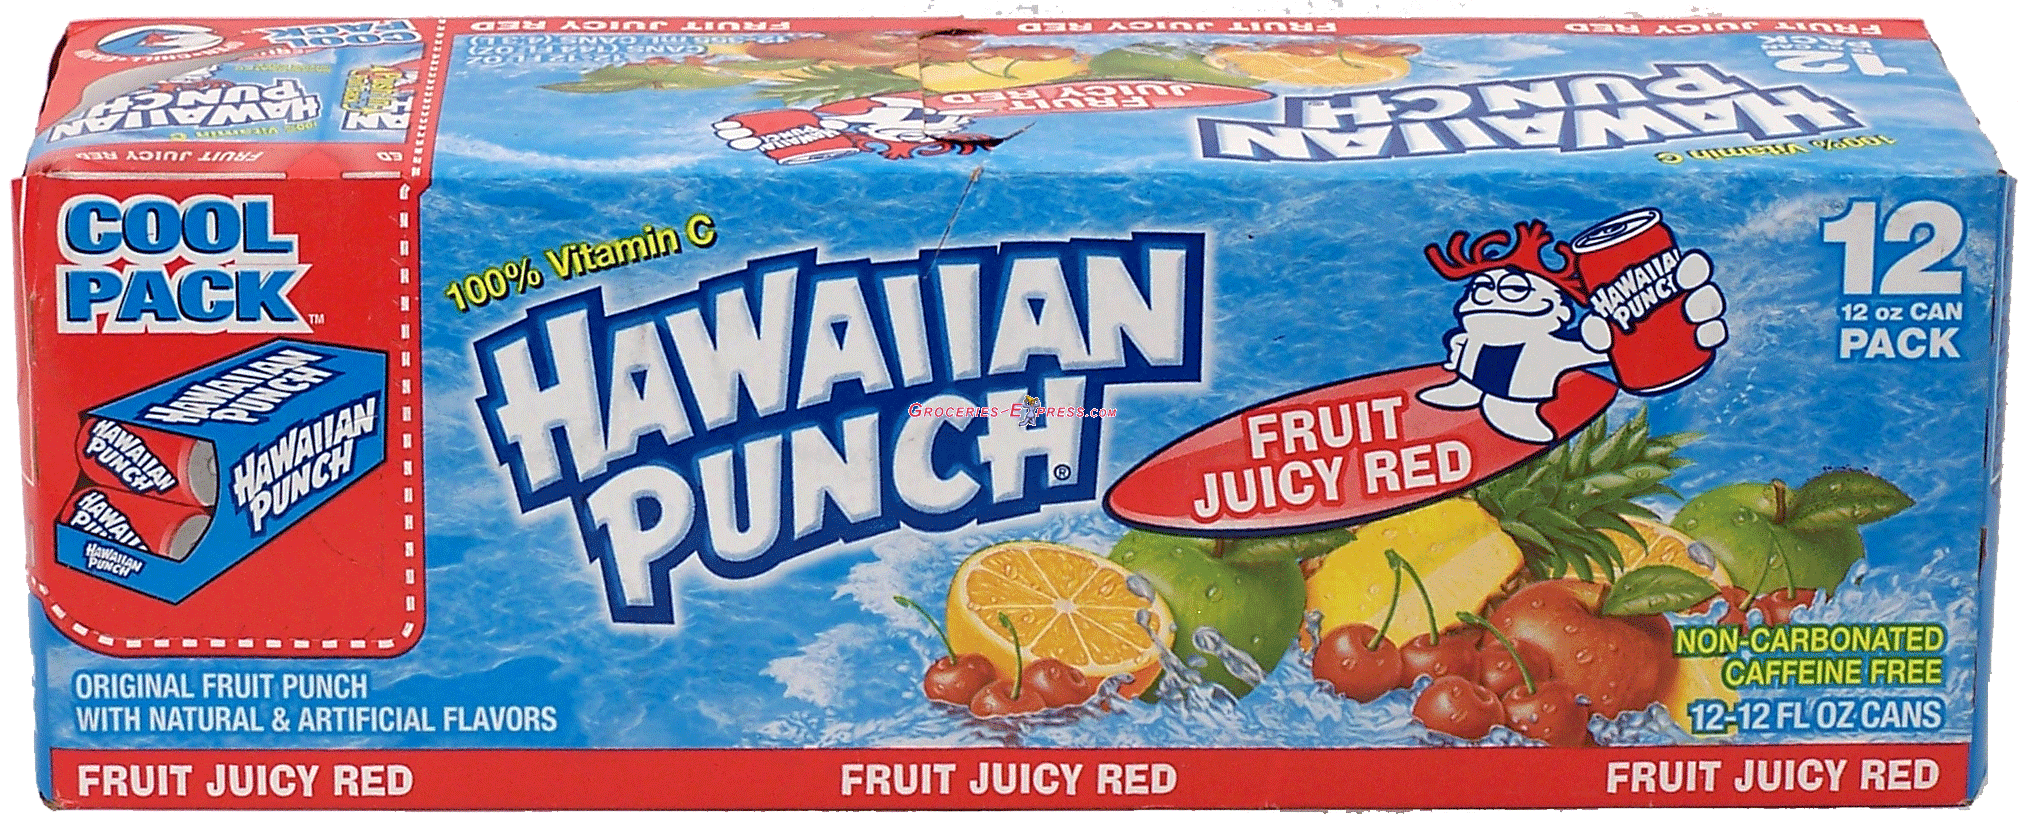 Hawaiian Punch  fruit juicy red fruit punch, 5% fruit juice, 12-pack 12-ounce cans Full-Size Picture